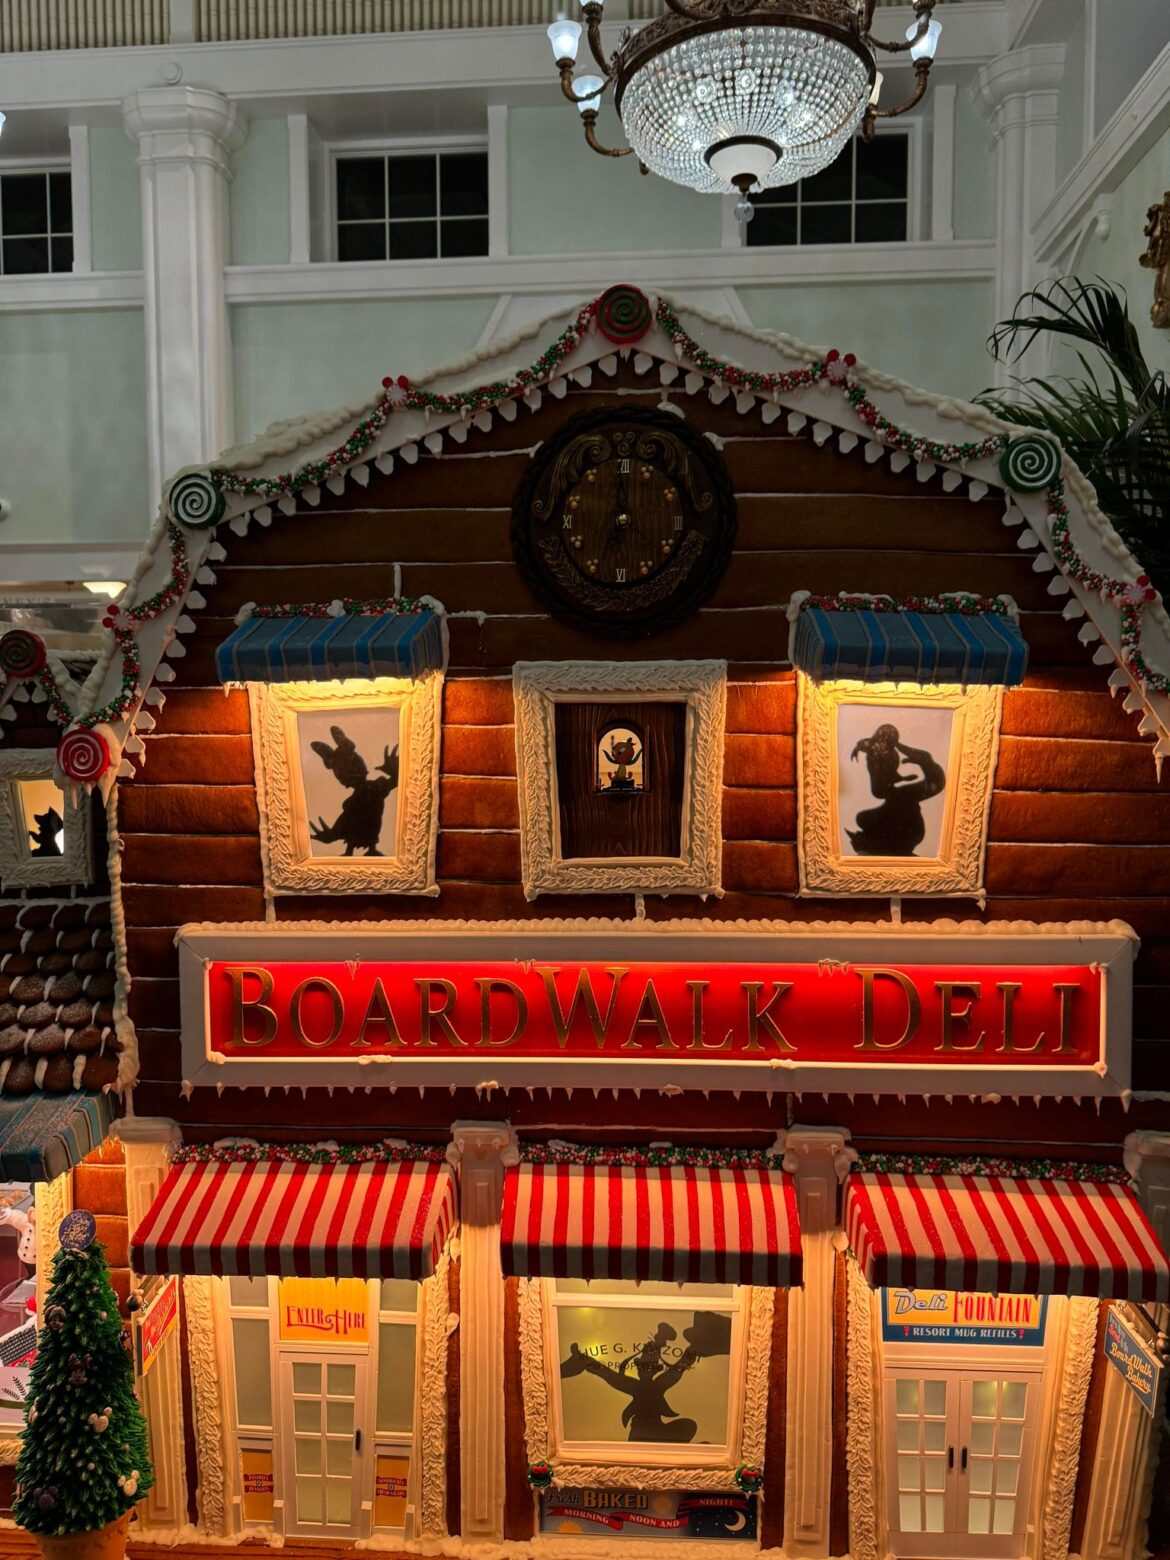 Gingerbread BoardWalk Deli and Sweet Treats Arrive at Disney’s BoardWalk with Special Surprise